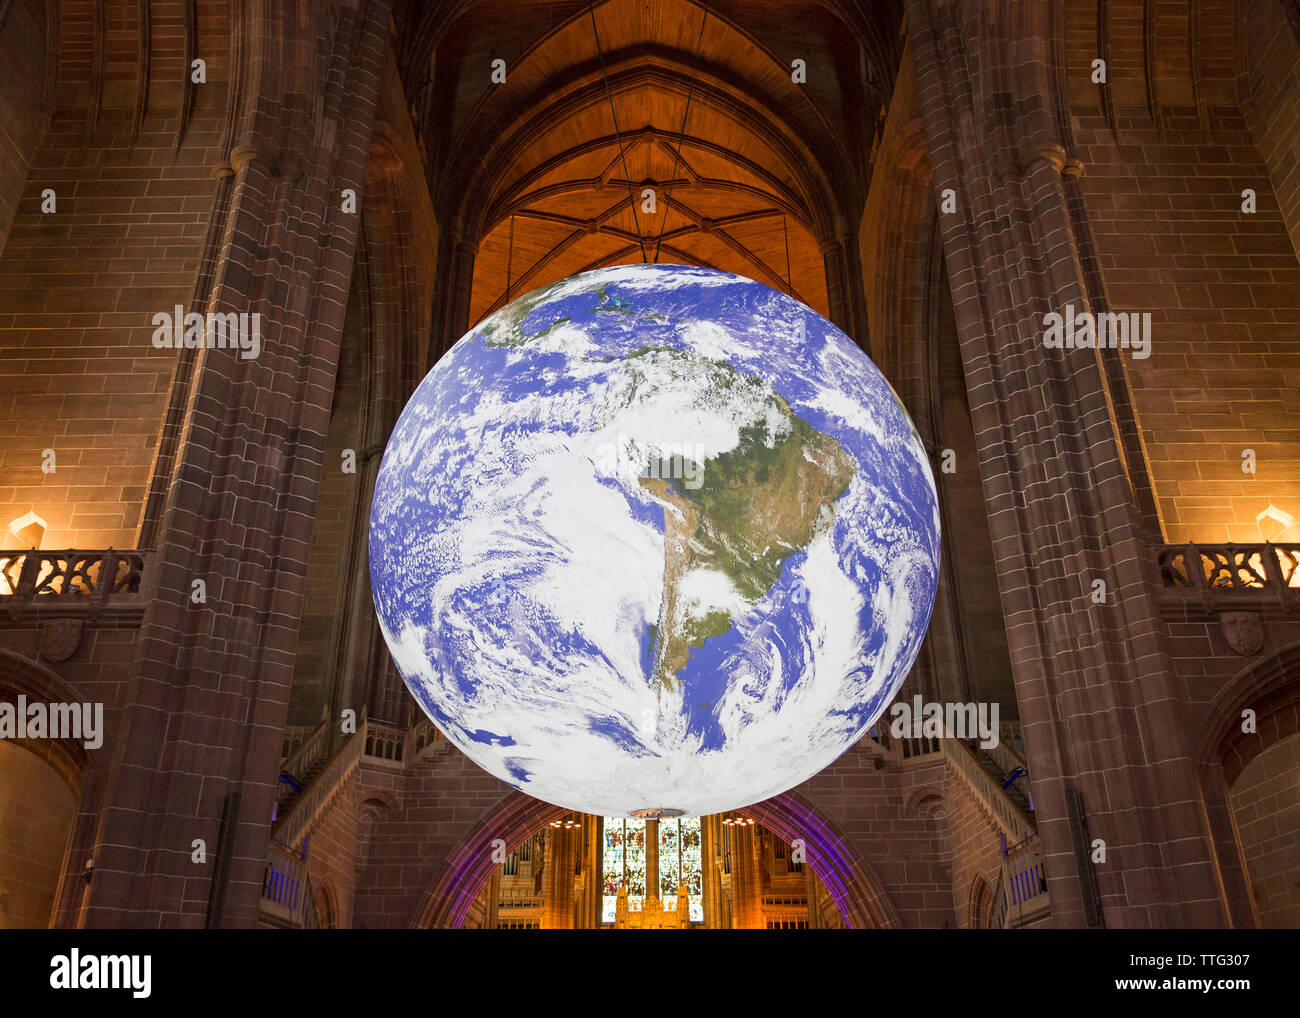 Gaia, Liverpool Cathedral, Liverpool, England, UK, planet Earth art installation by Luke Jerram Stock Photo